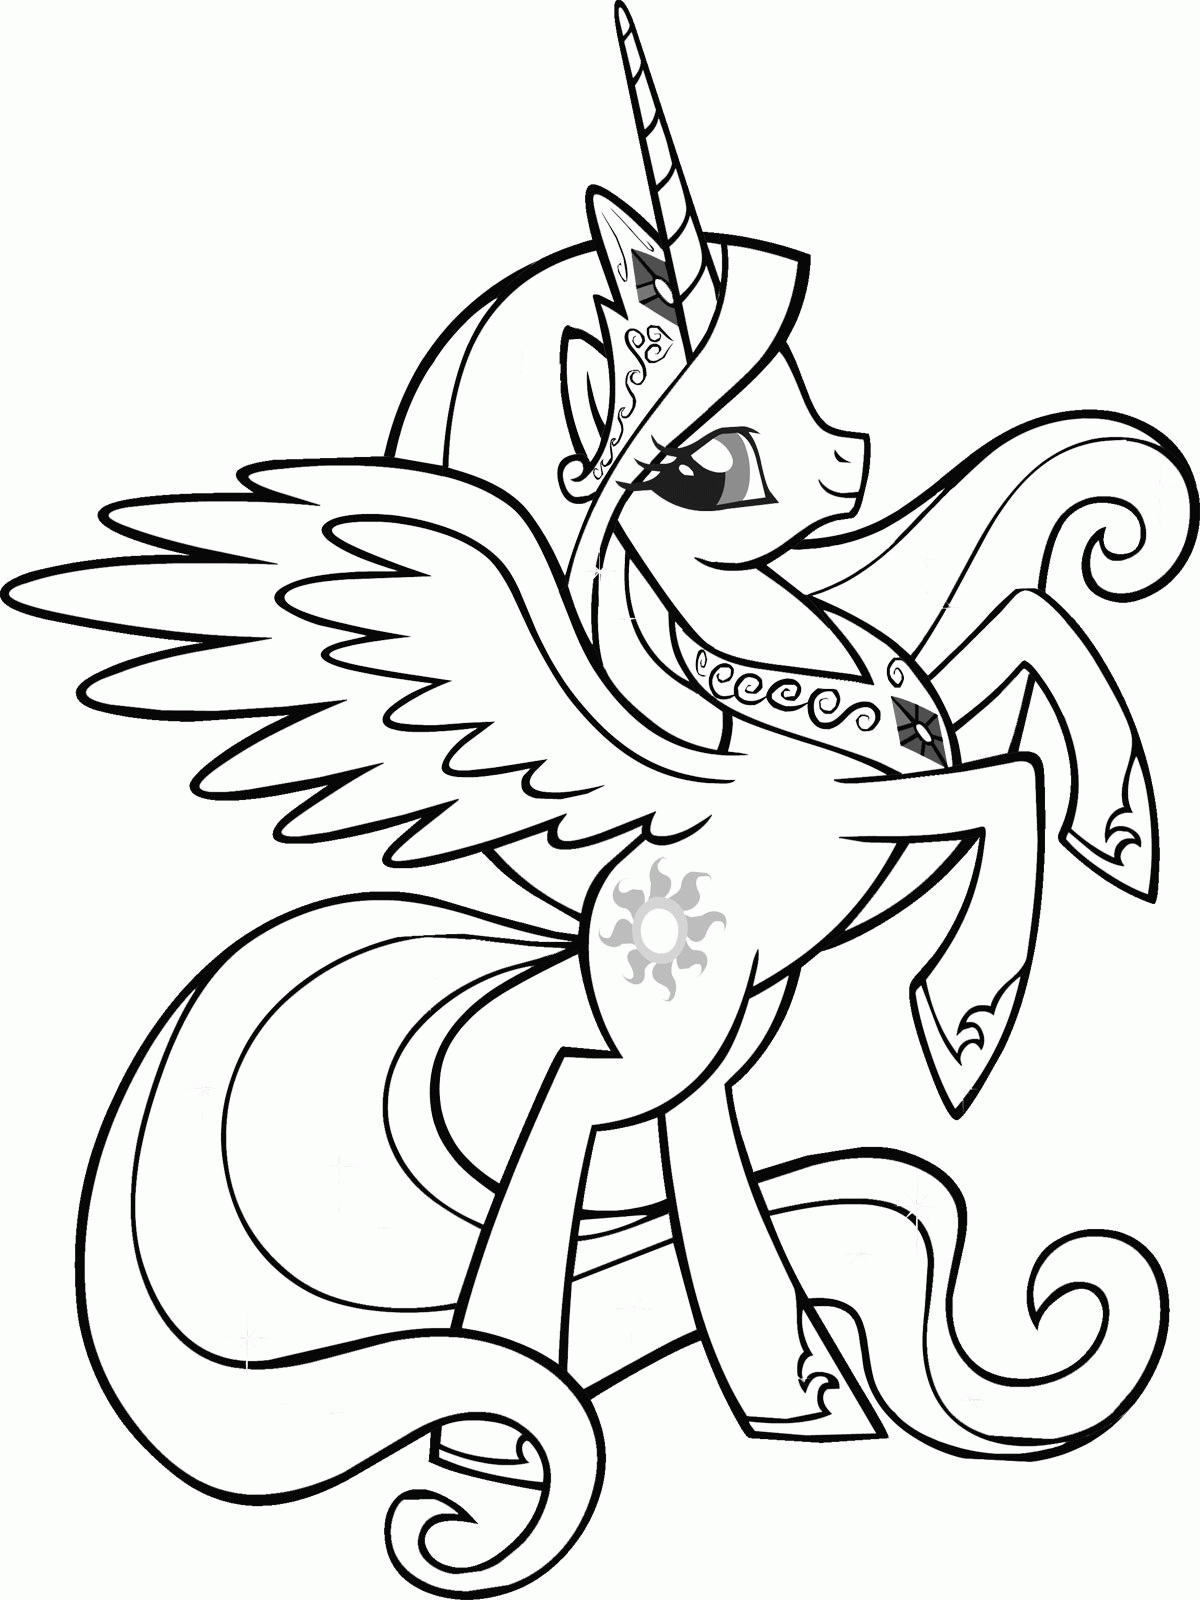 Coloring Pages Printables My Little Pony - High Quality Coloring Pages